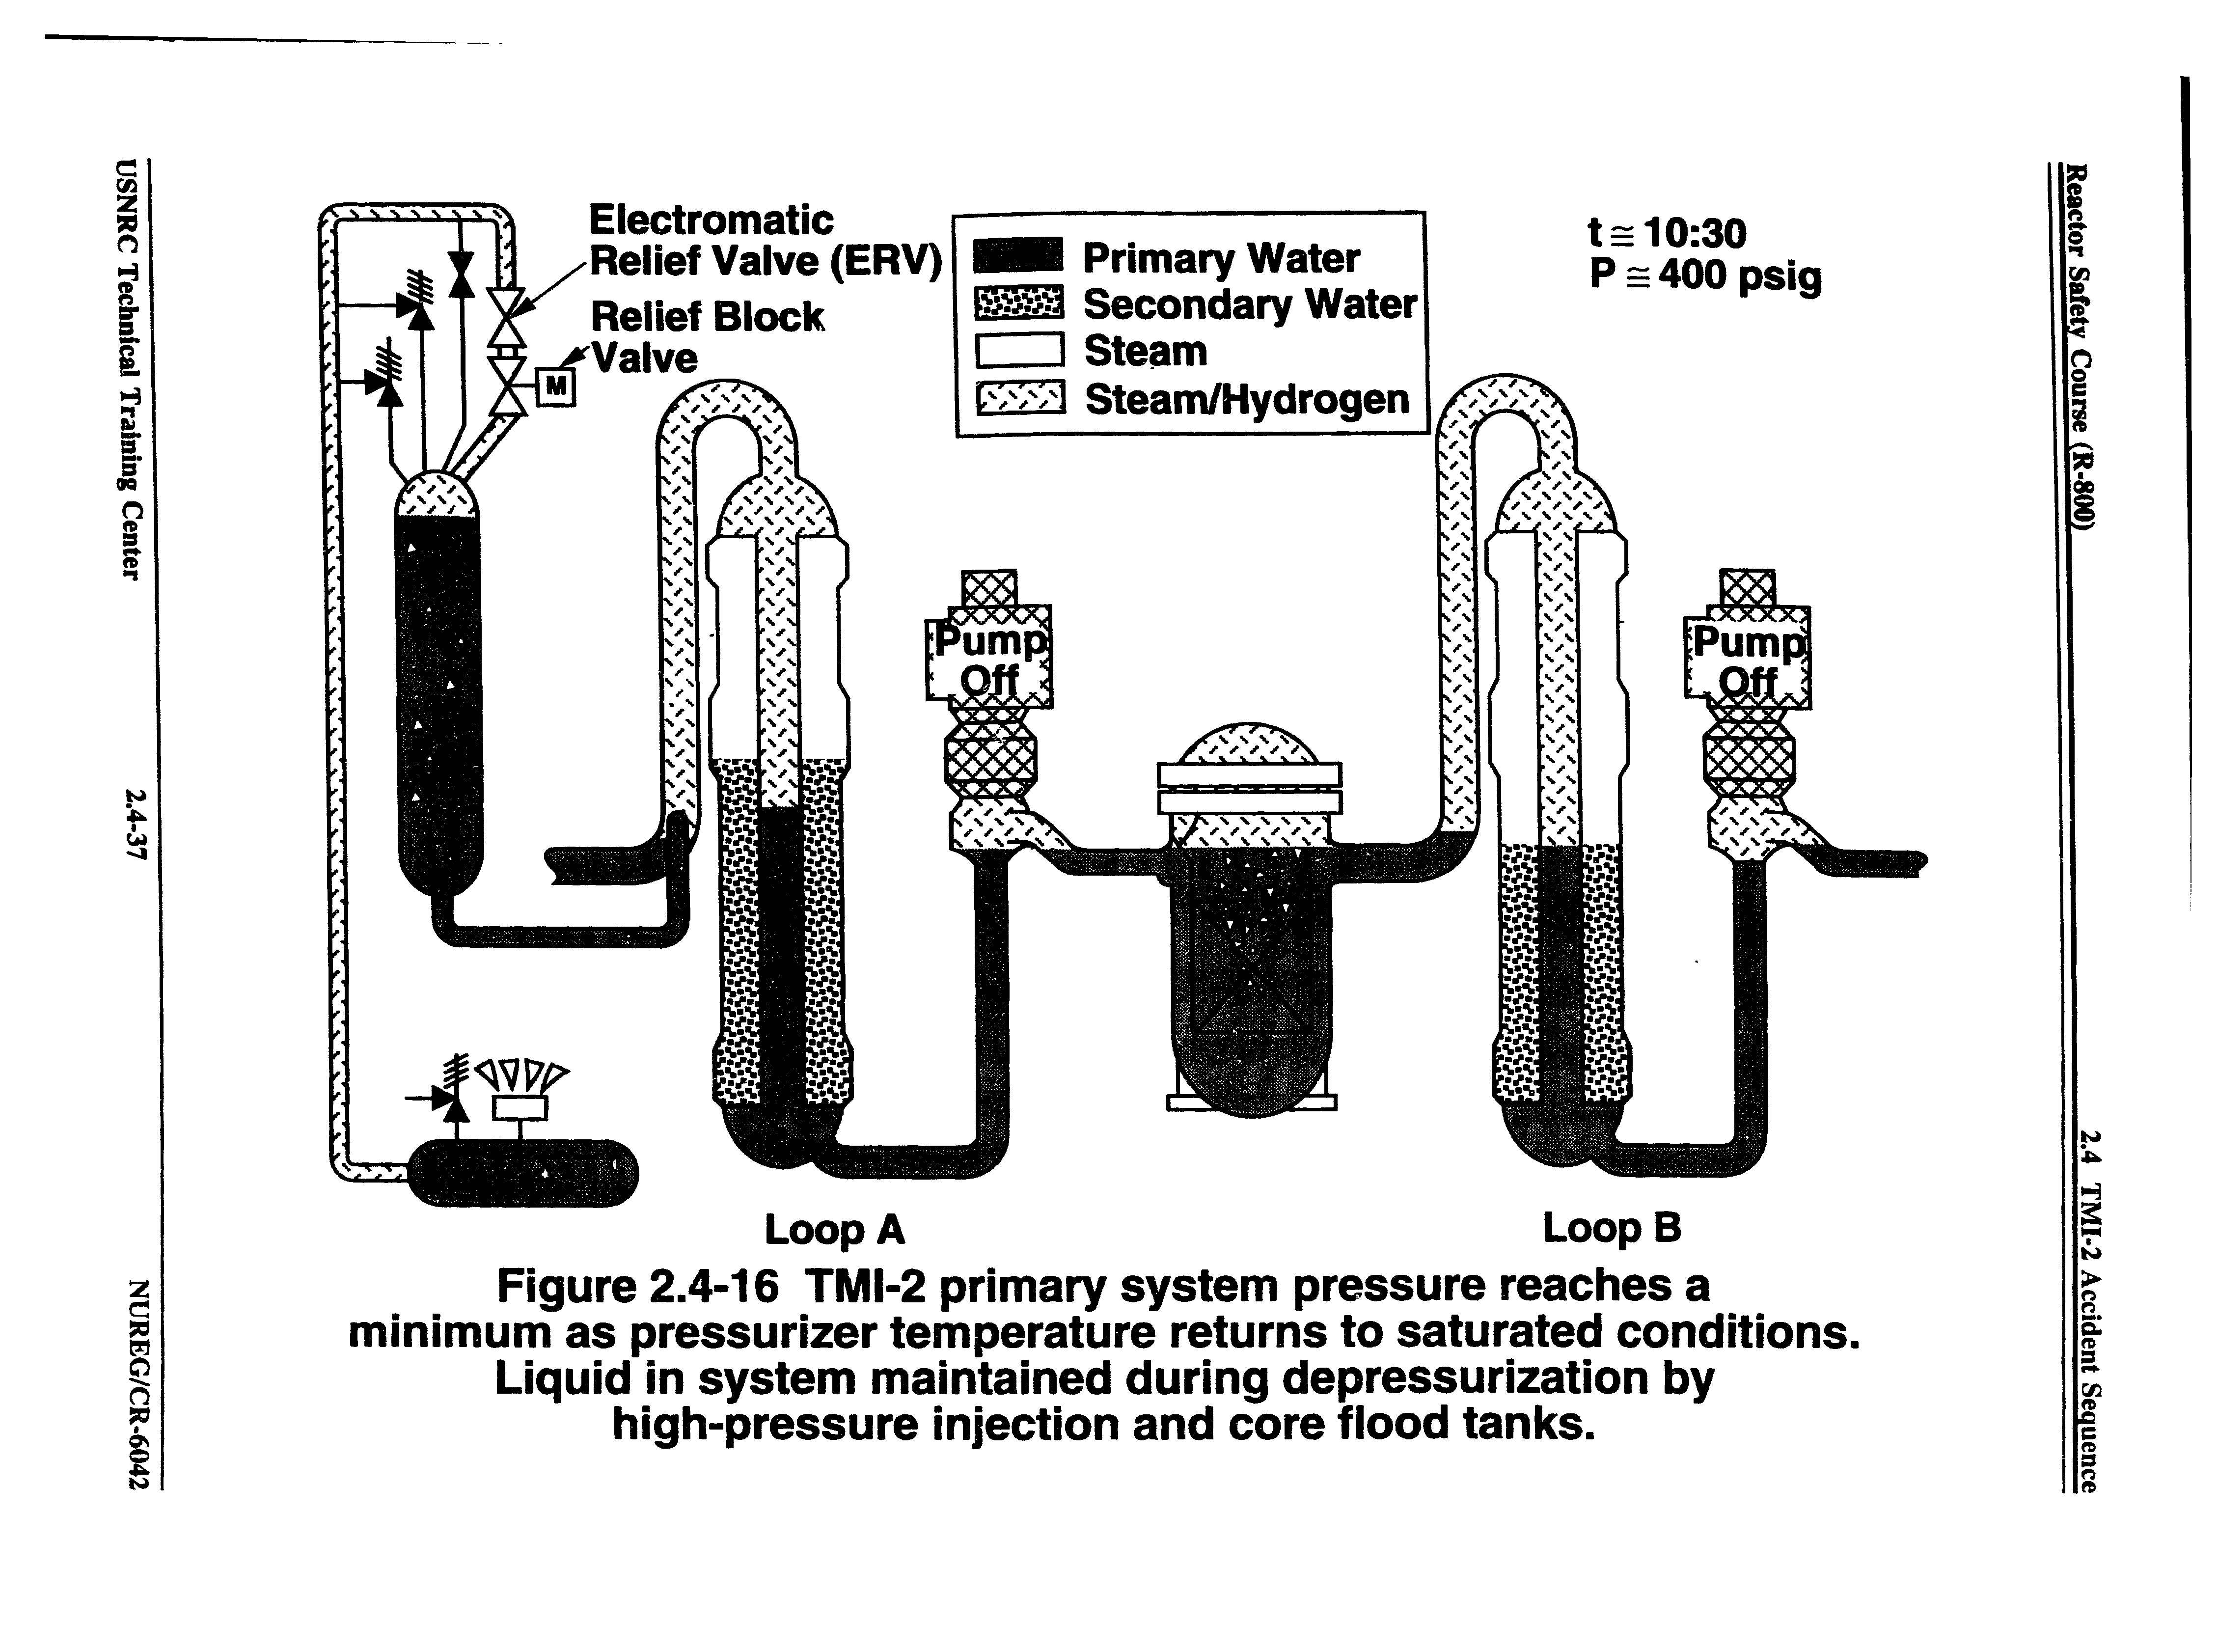 Figure 2.4-16 TMI-2 primary system pressure reaches a minimum as pressurizer temperature returns to saturated conditions. Liquid in system maintained during depressurization by high-pressure injection and core fiood tanks.